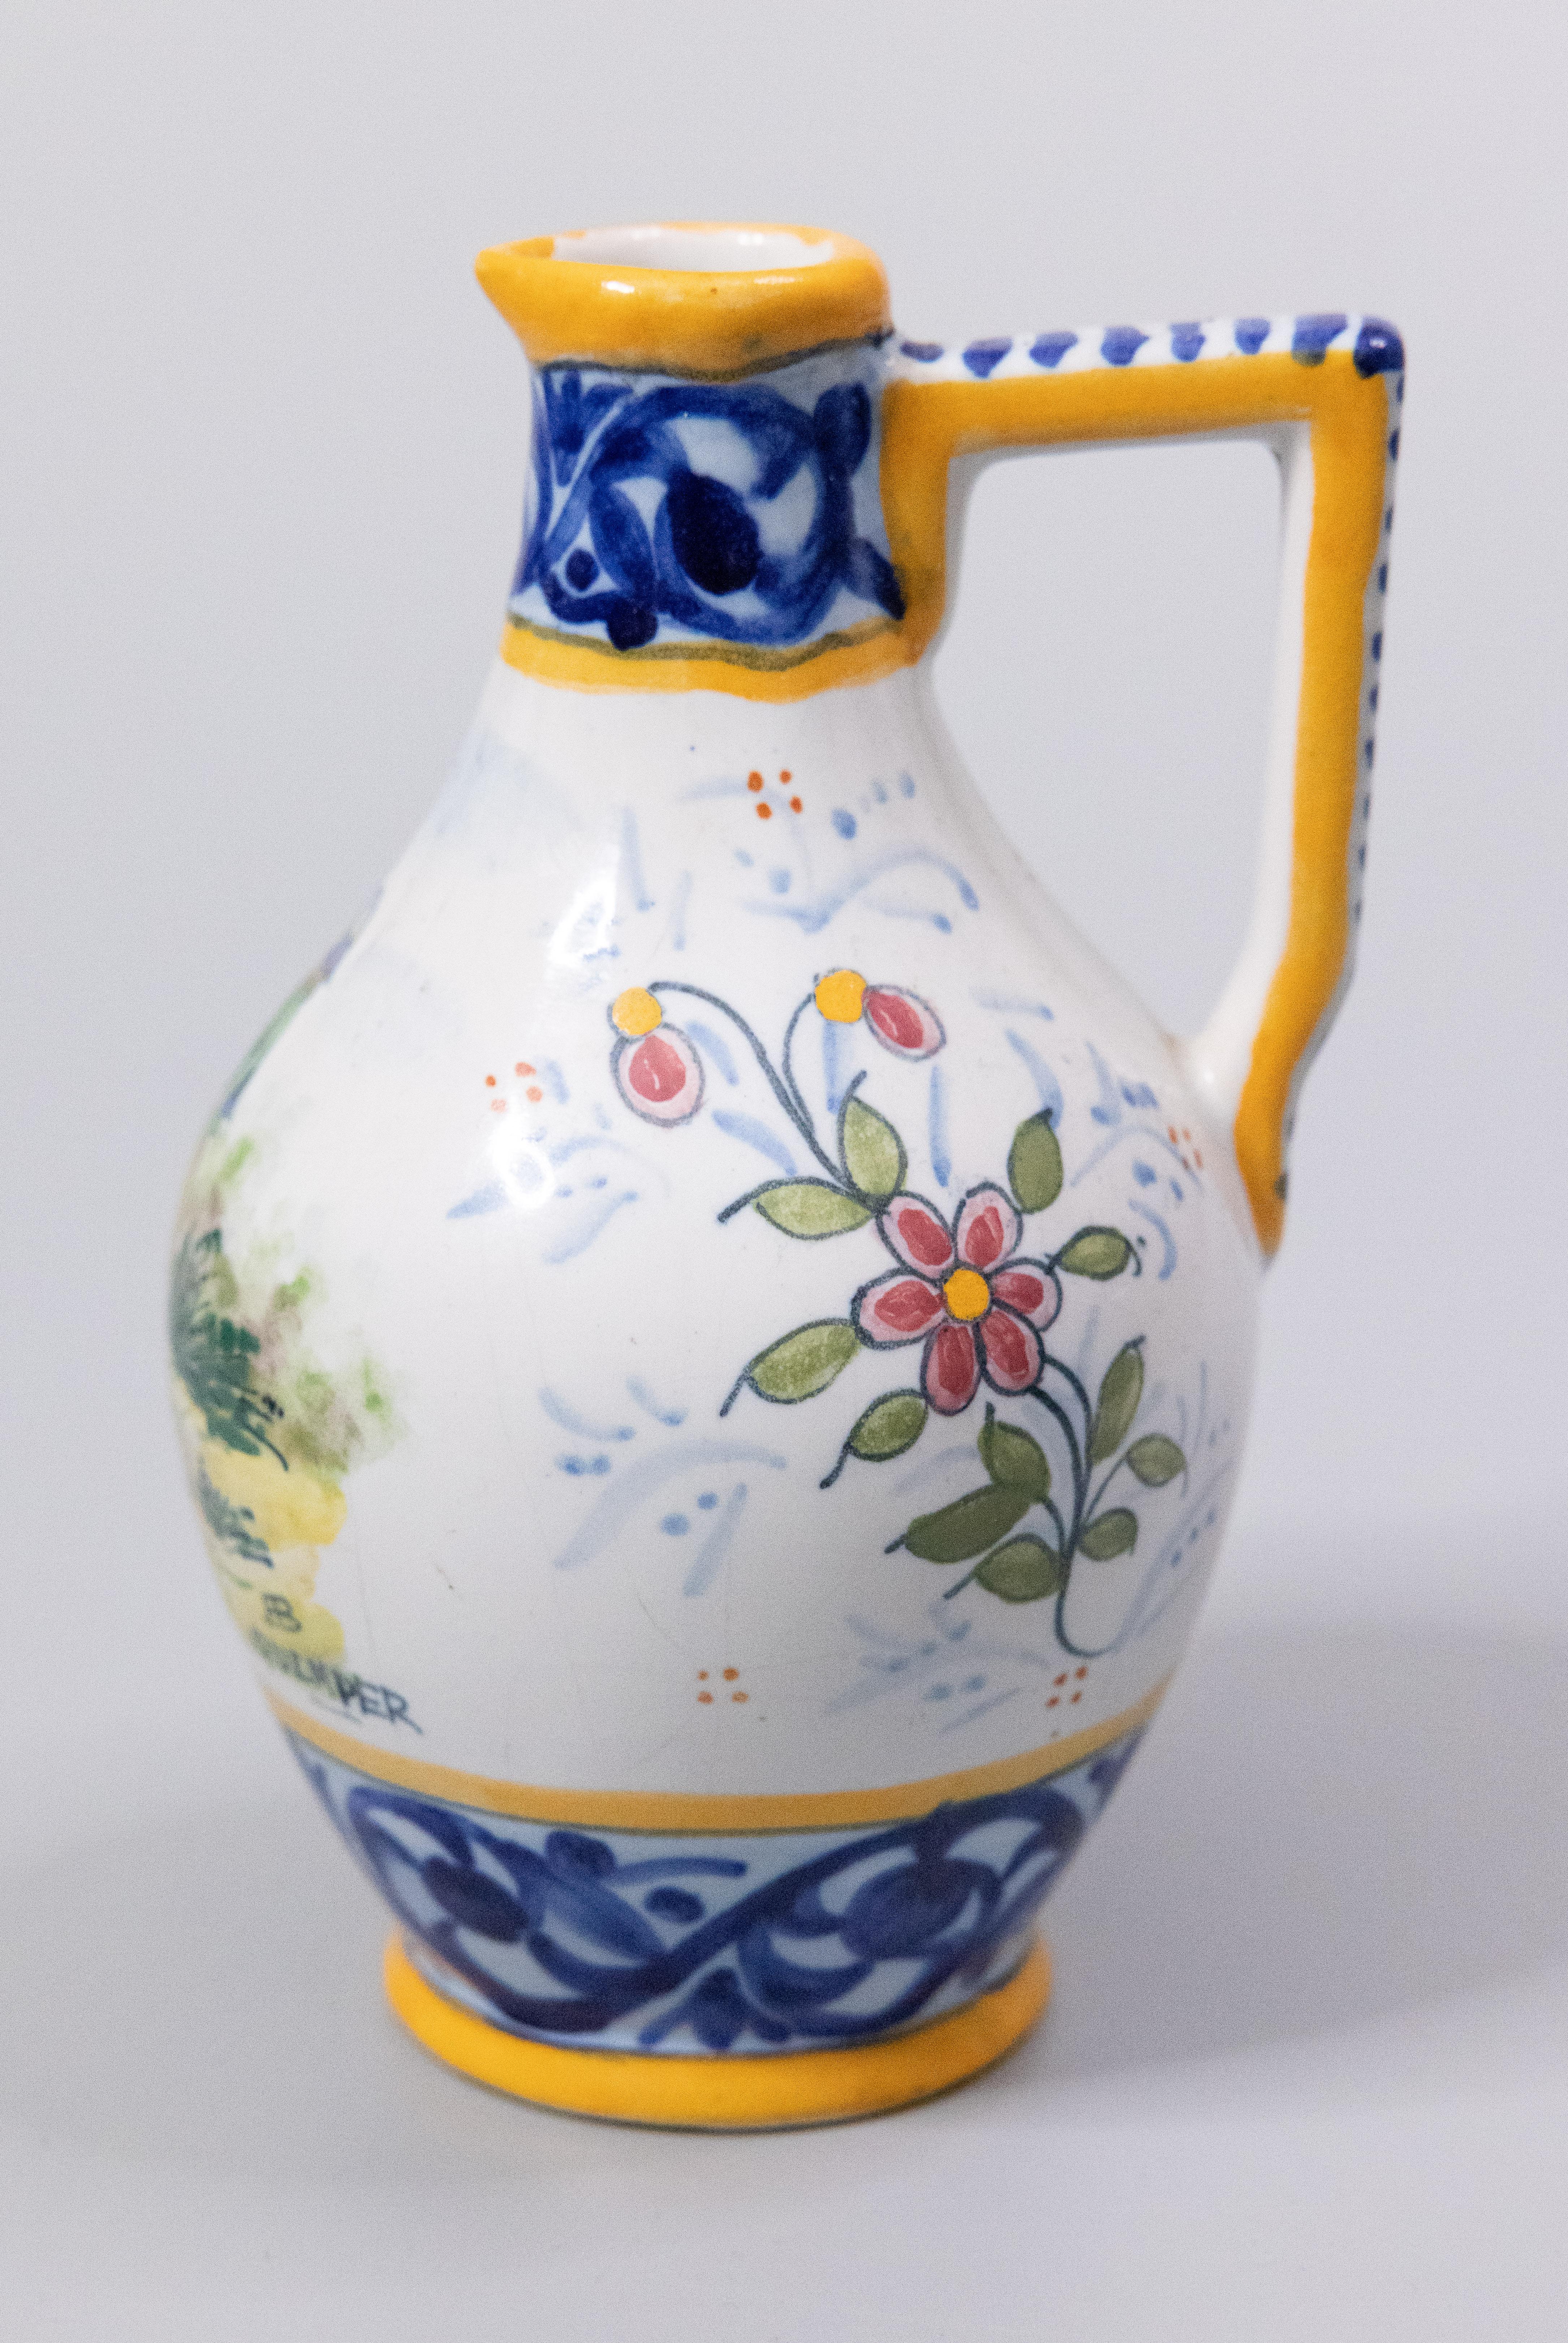 A charming petite antique French faience Quimper pitcher or small ewer, circa 1910. Maker's mark on reverse. This lovely pitcher is decorated with a hand painted traditional Breton man surrounded by a floral pattern in beautiful vibrant colors. It's